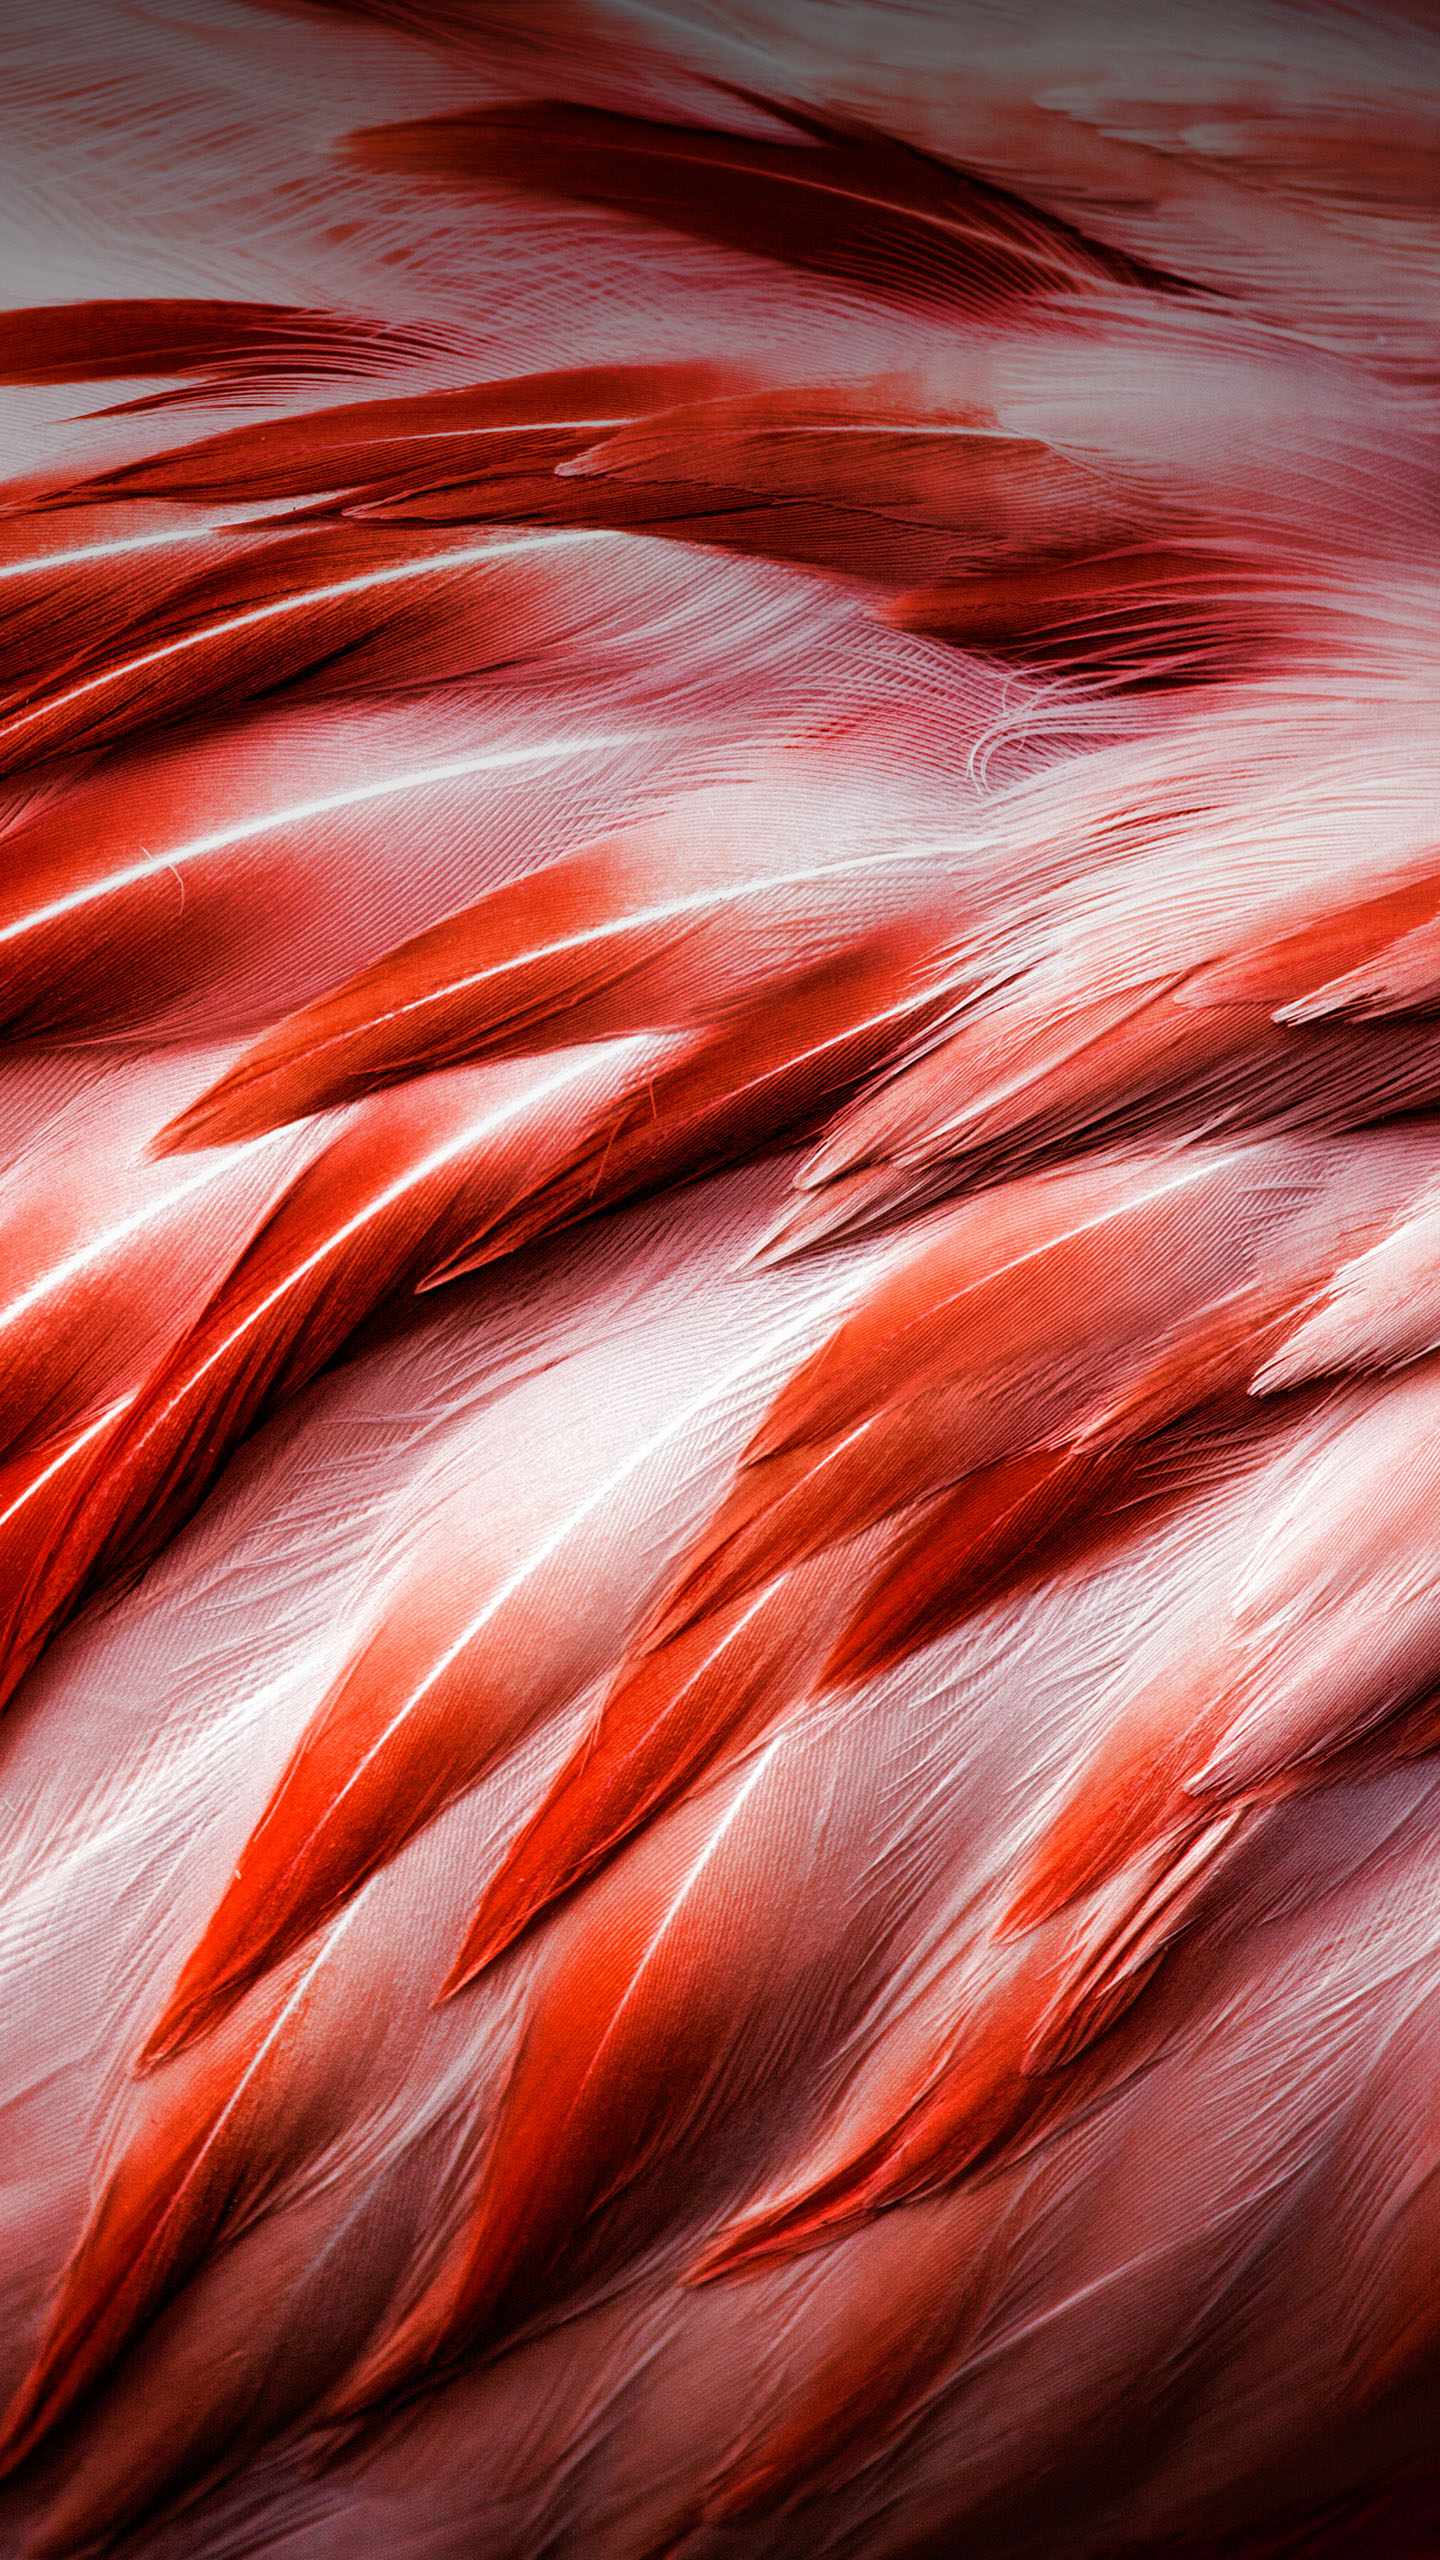 5.5 inch hd wallpaper,red,pink,orange,feather,close up